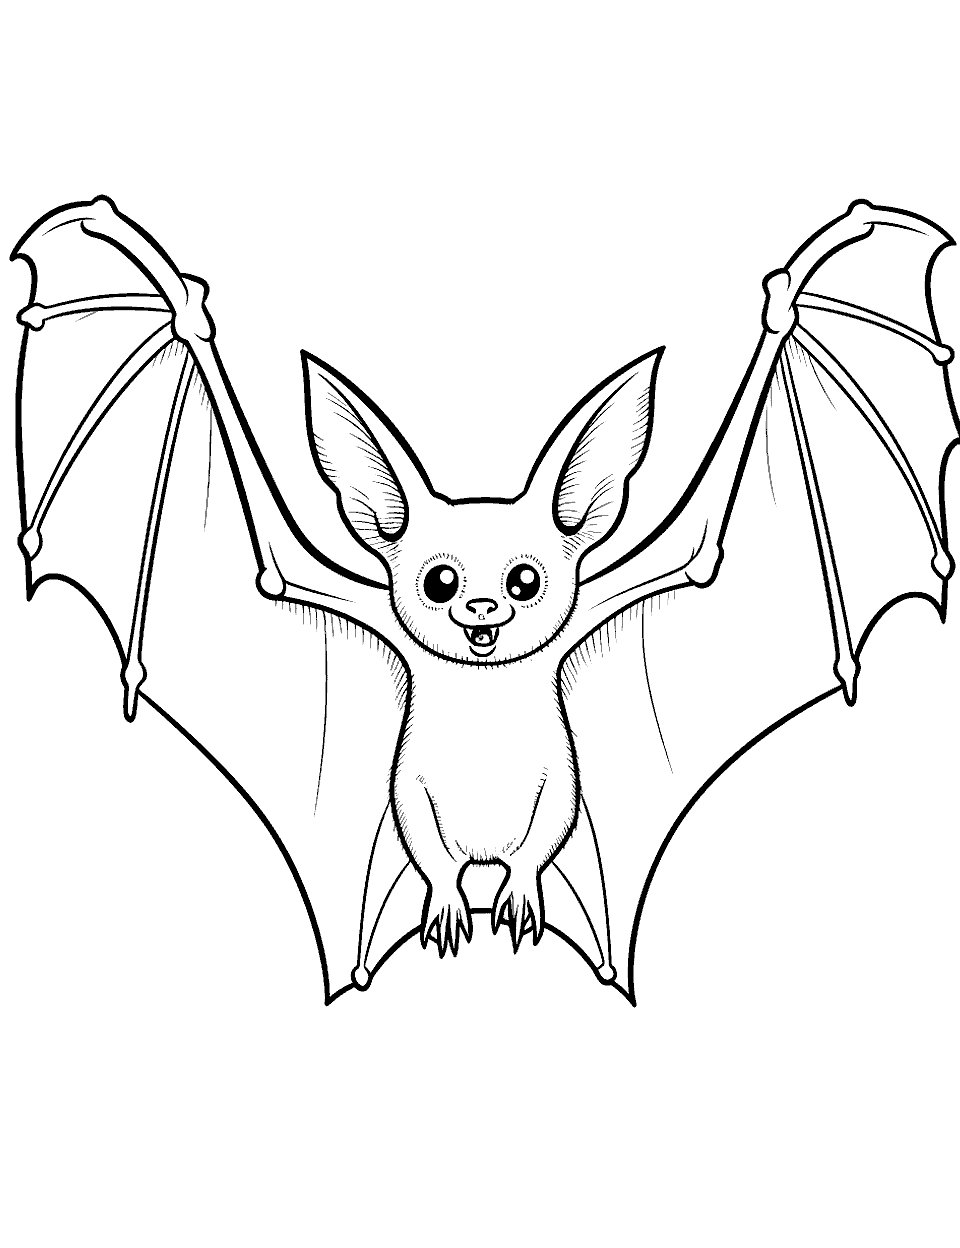 Bat Sketch for Coloring Page - A lightly sketched bat, allowing kids to add their own details.